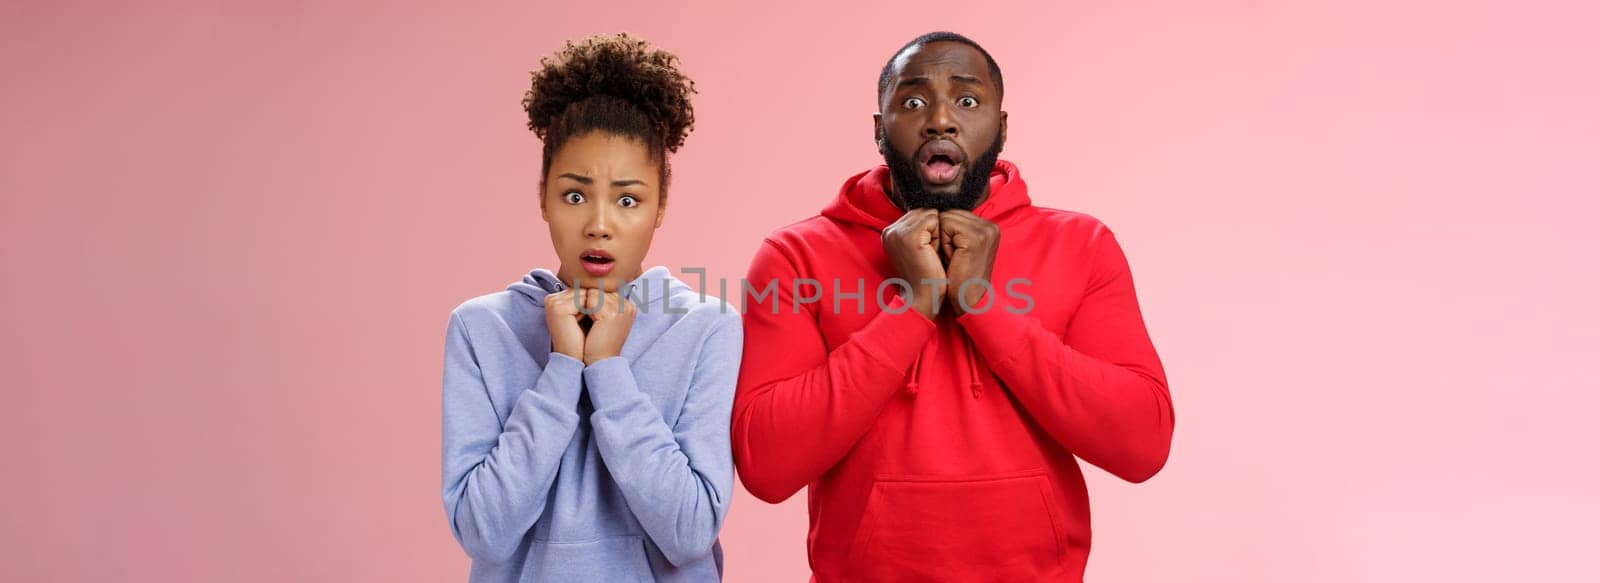 Upset worried two siblings watching together scary disturbing horror movie gasping frowning cringing shock intense emotions press hands chest widen eyes terrified standing nervous pink background by Benzoix